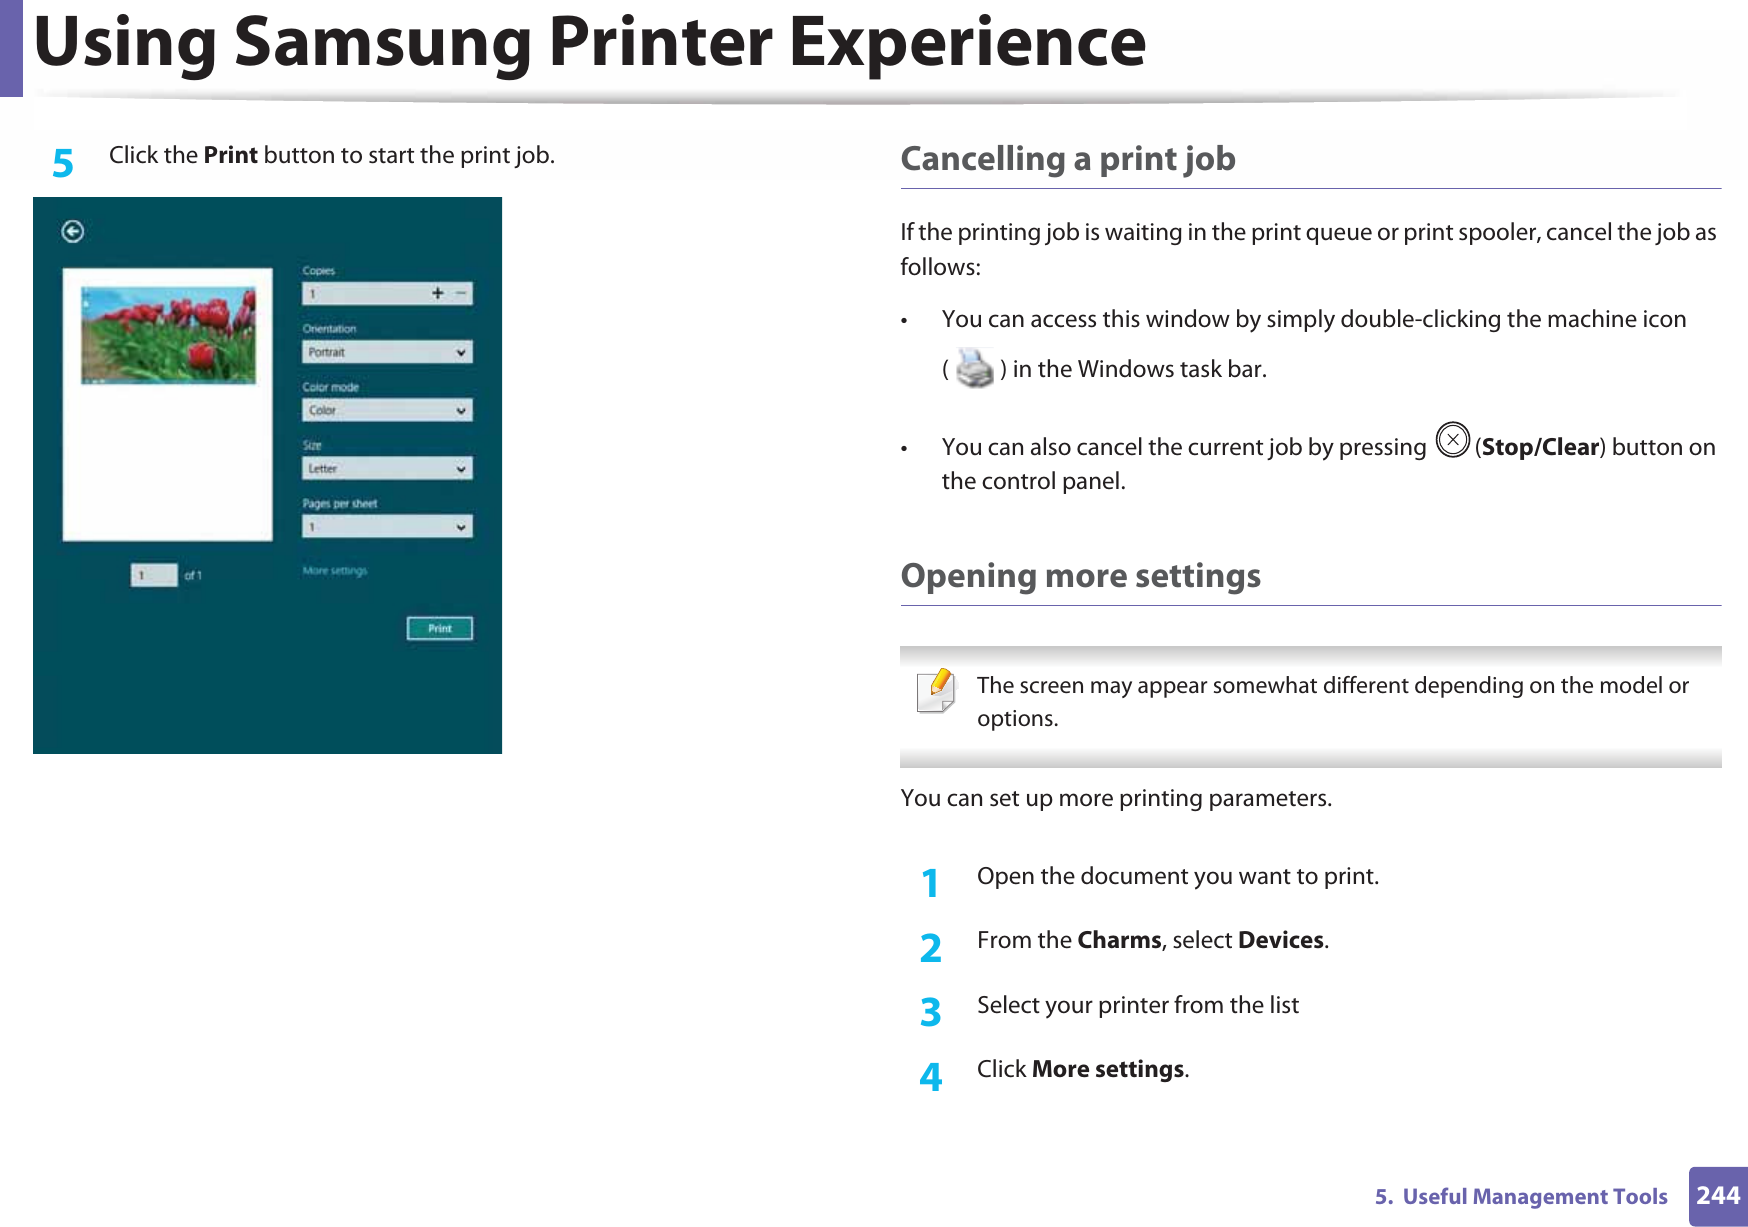 Using Samsung Printer Experience2445.  Useful Management Tools5  Click the Print button to start the print job. Cancelling a print jobIf the printing job is waiting in the print queue or print spooler, cancel the job as follows:• You can access this window by simply double-clicking the machine icon ( ) in the Windows task bar. • You can also cancel the current job by pressing  (Stop/Clear) button on the control panel.Opening more settings The screen may appear somewhat different depending on the model or options. You can set up more printing parameters.1Open the document you want to print.2  From the Charms, select Devices.3  Select your printer from the list4  Click More settings.